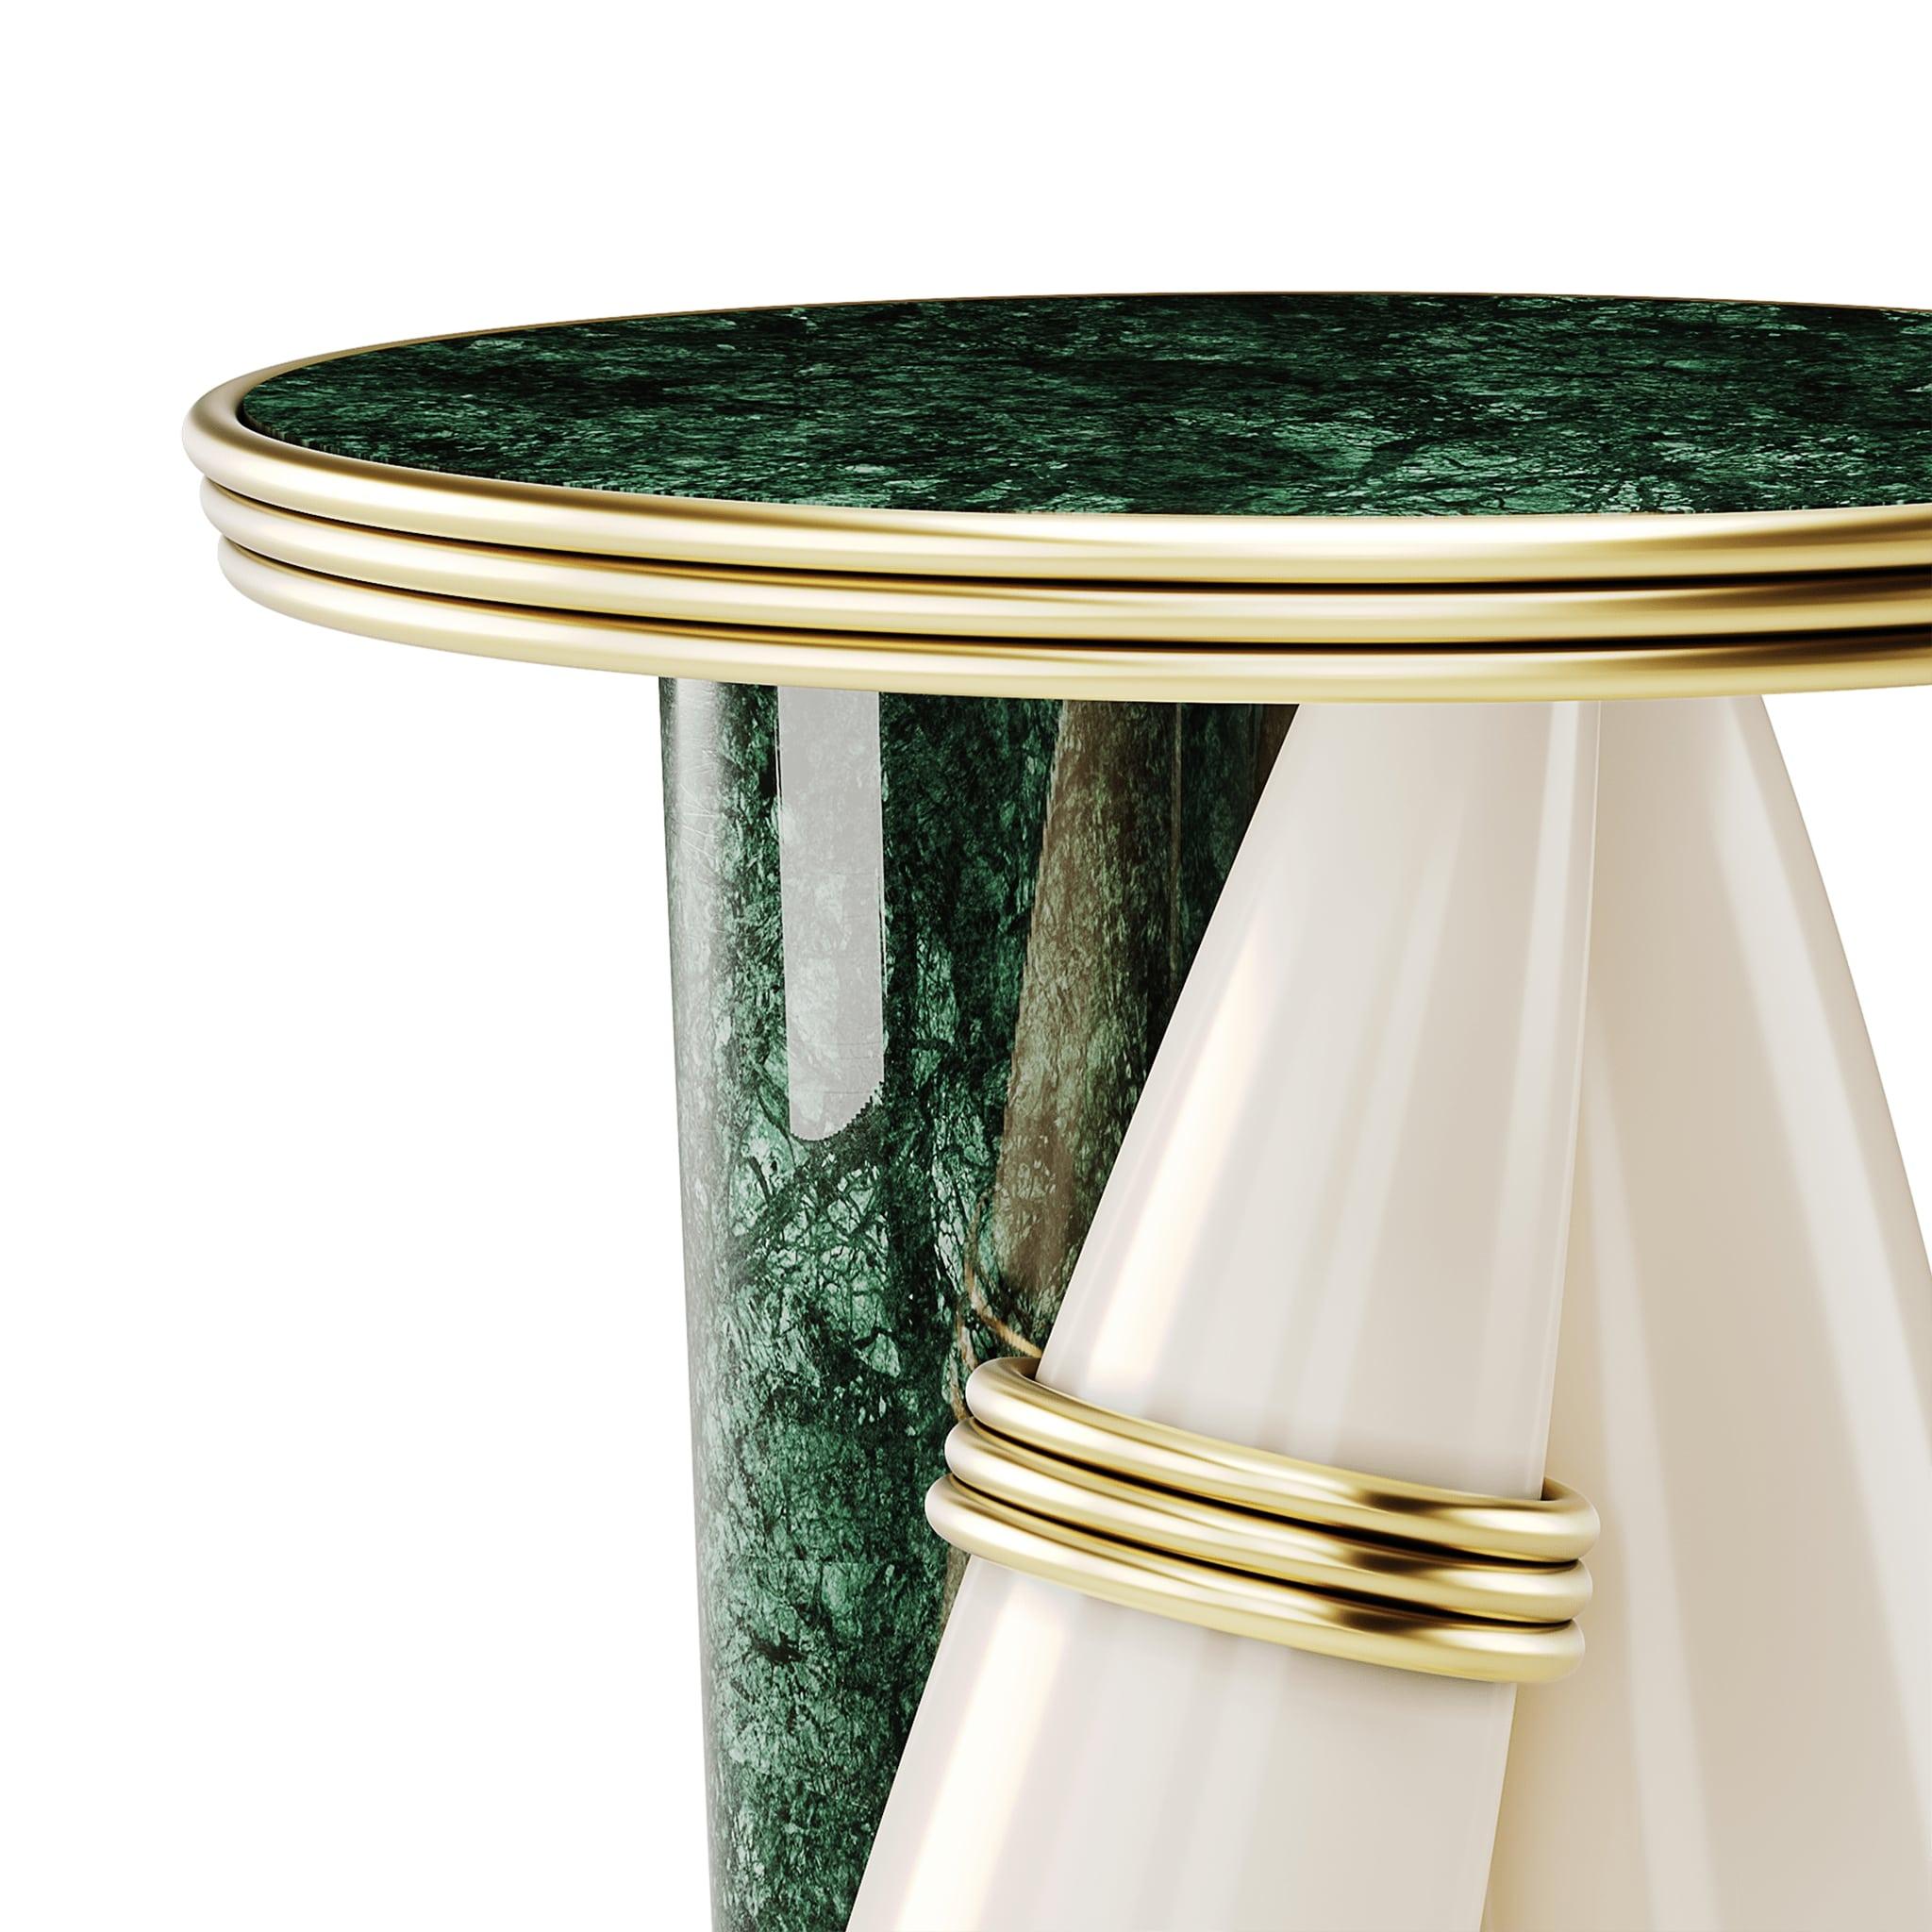 Contemporary 3 Legs Marble Round Side Table  Polished Marble  Gloss Lacquer

Billie Side Table owns a striking attitude and sculptural shapes. An elegant marble table with polished brass details promises to steal the show of any high-end interior